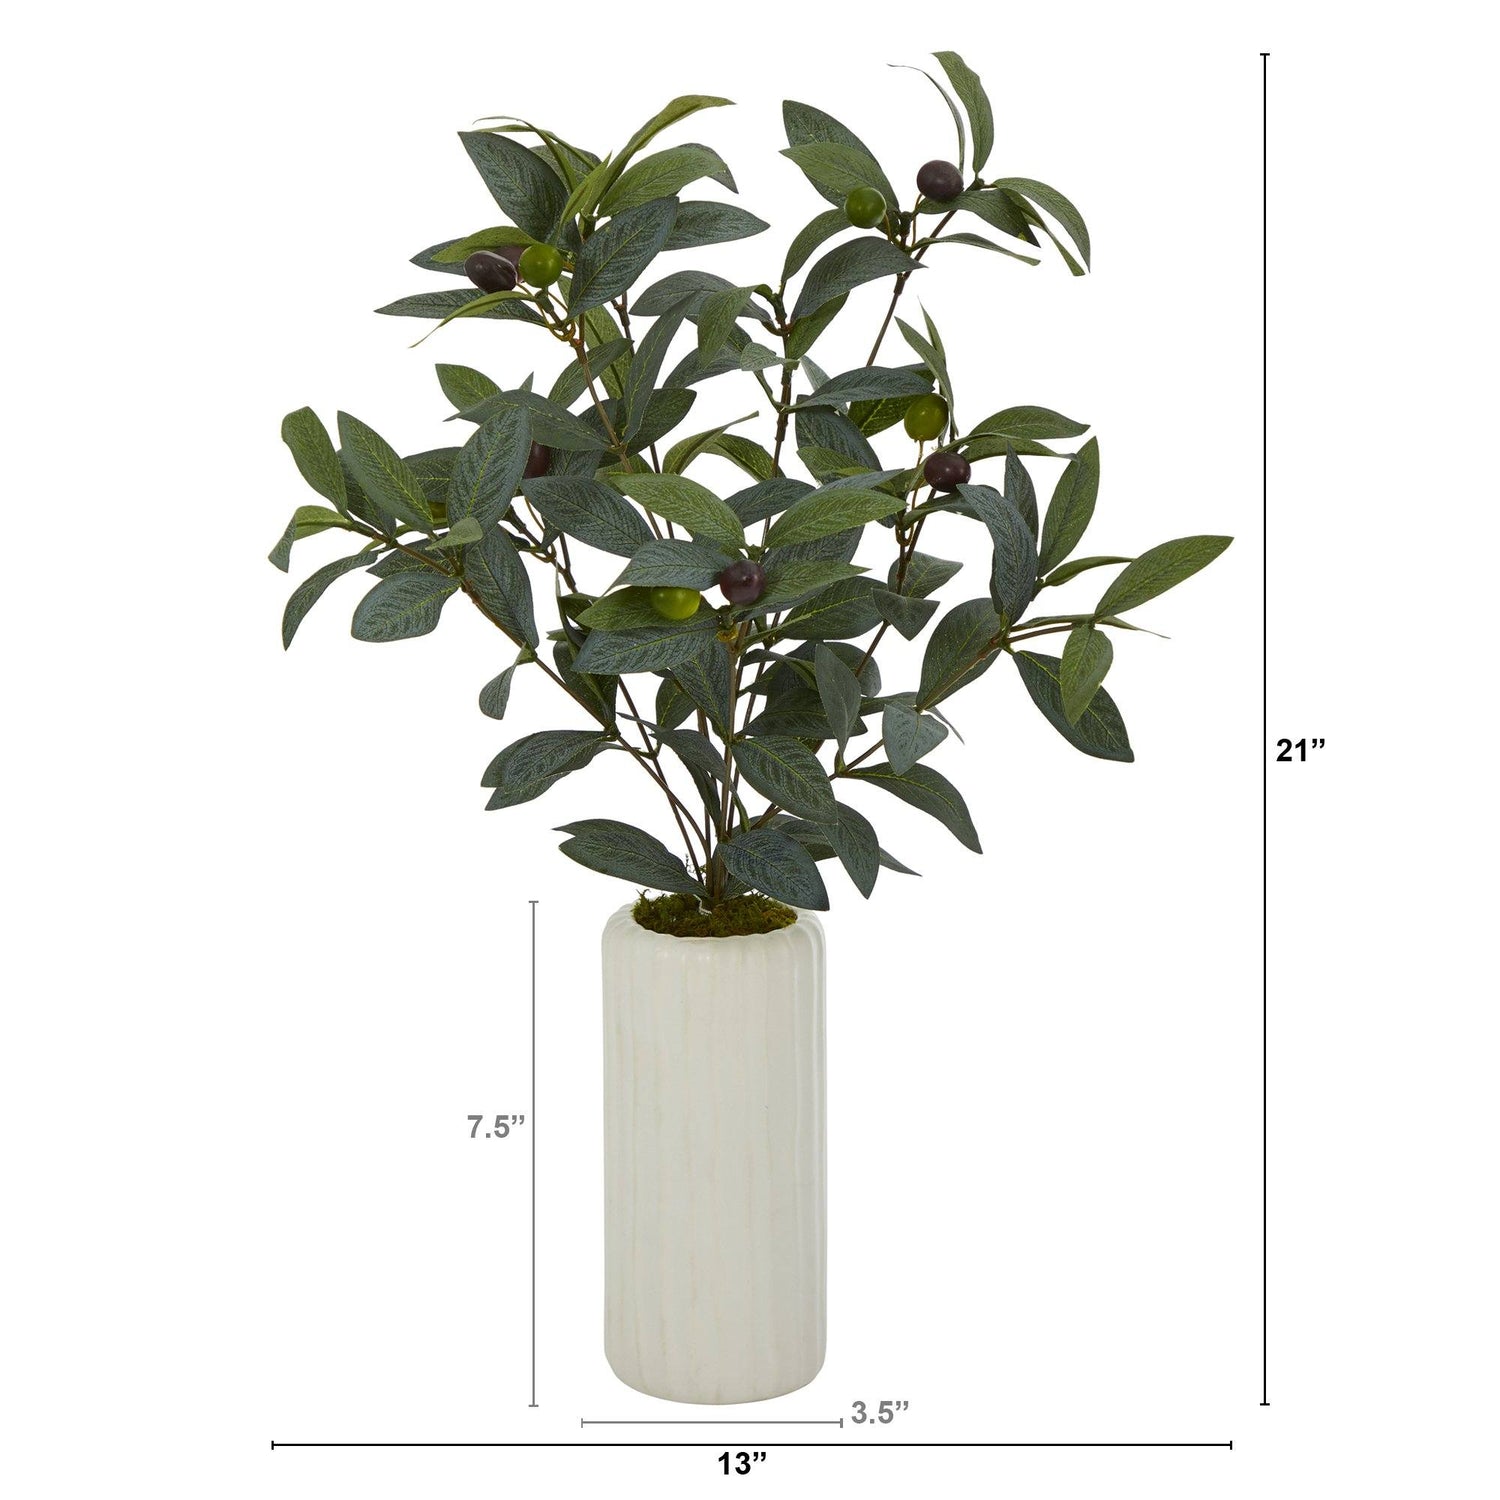 21” Olive Artificial Plant in White Planter